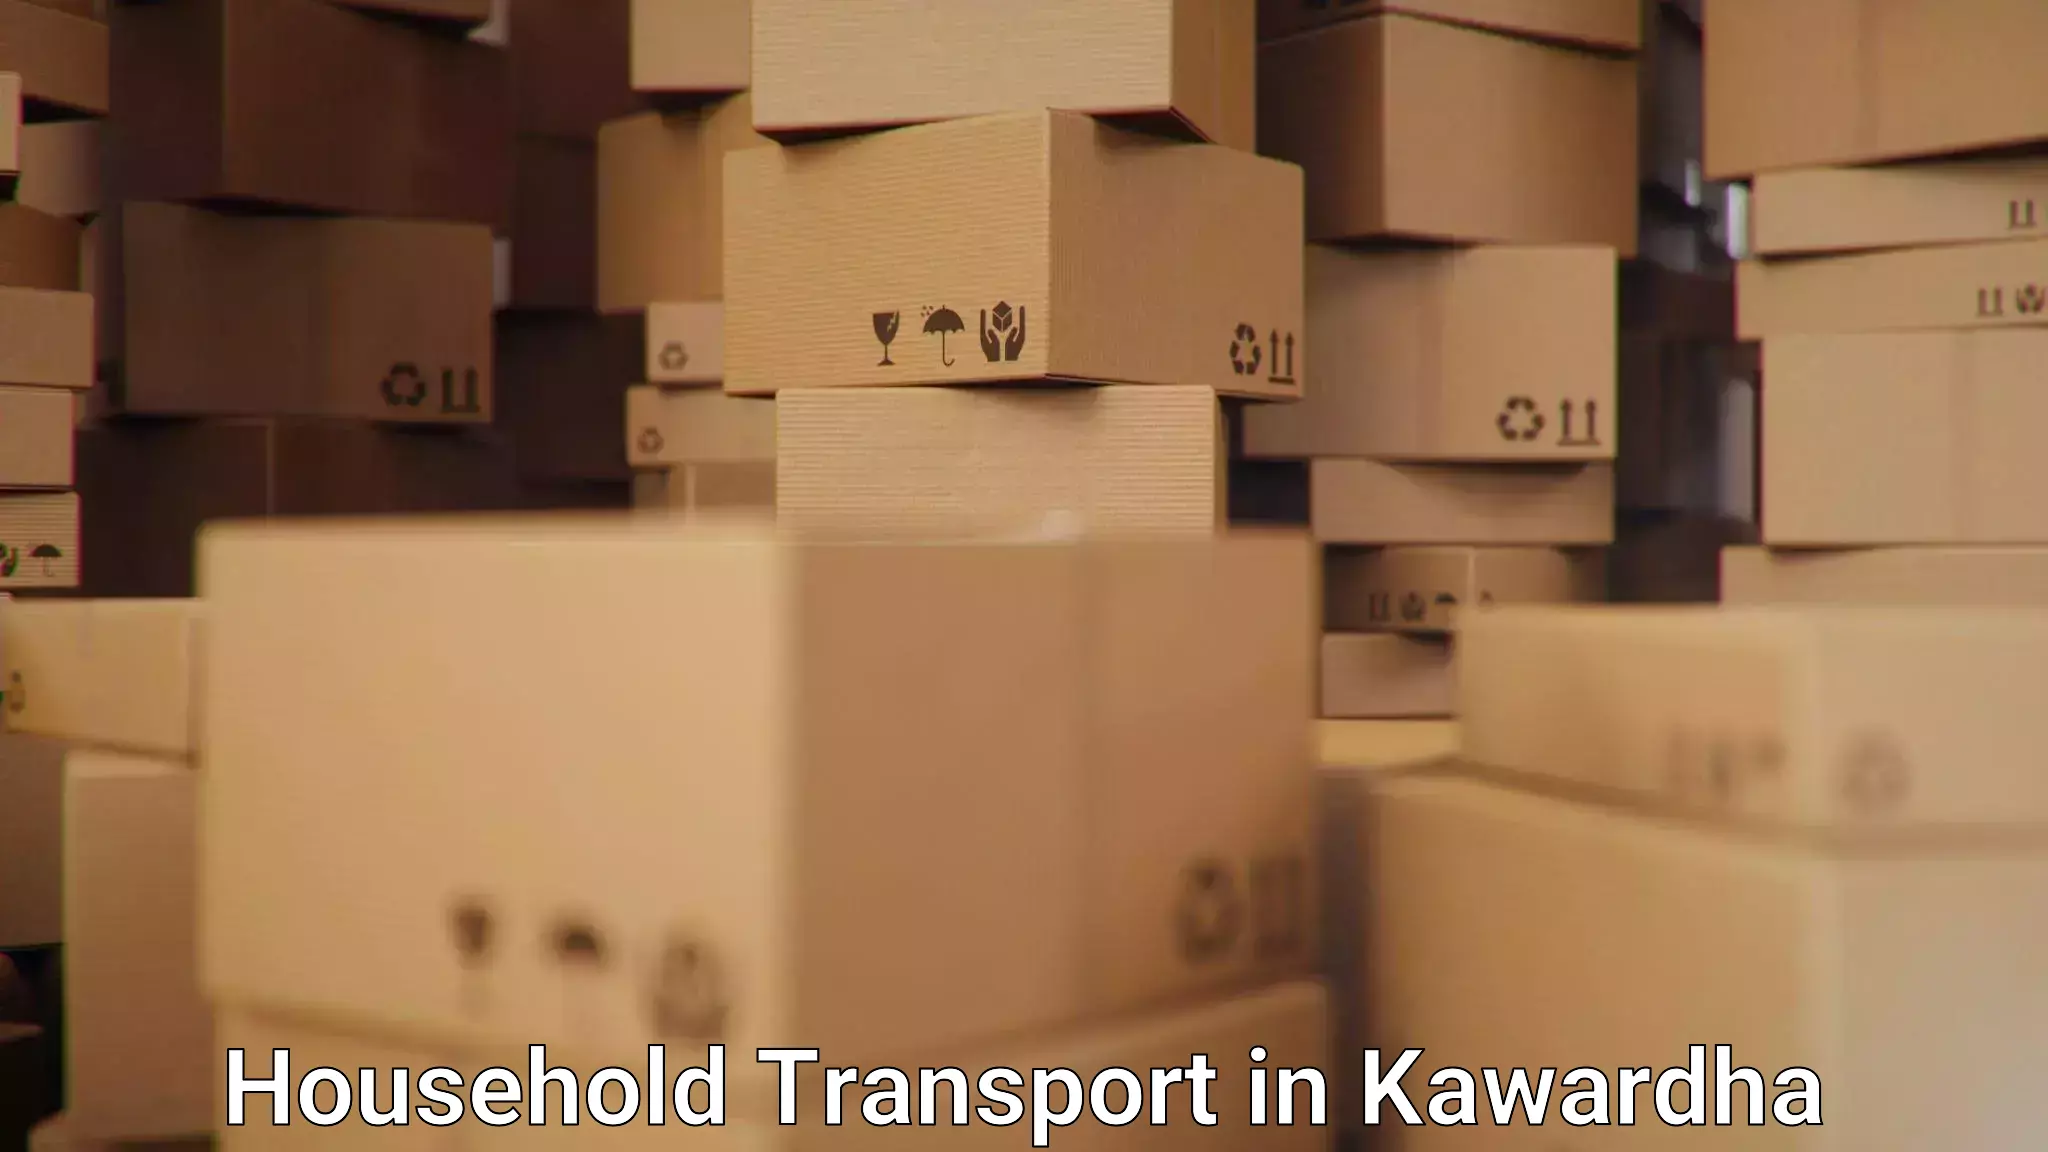 Moving and storage services in Kawardha